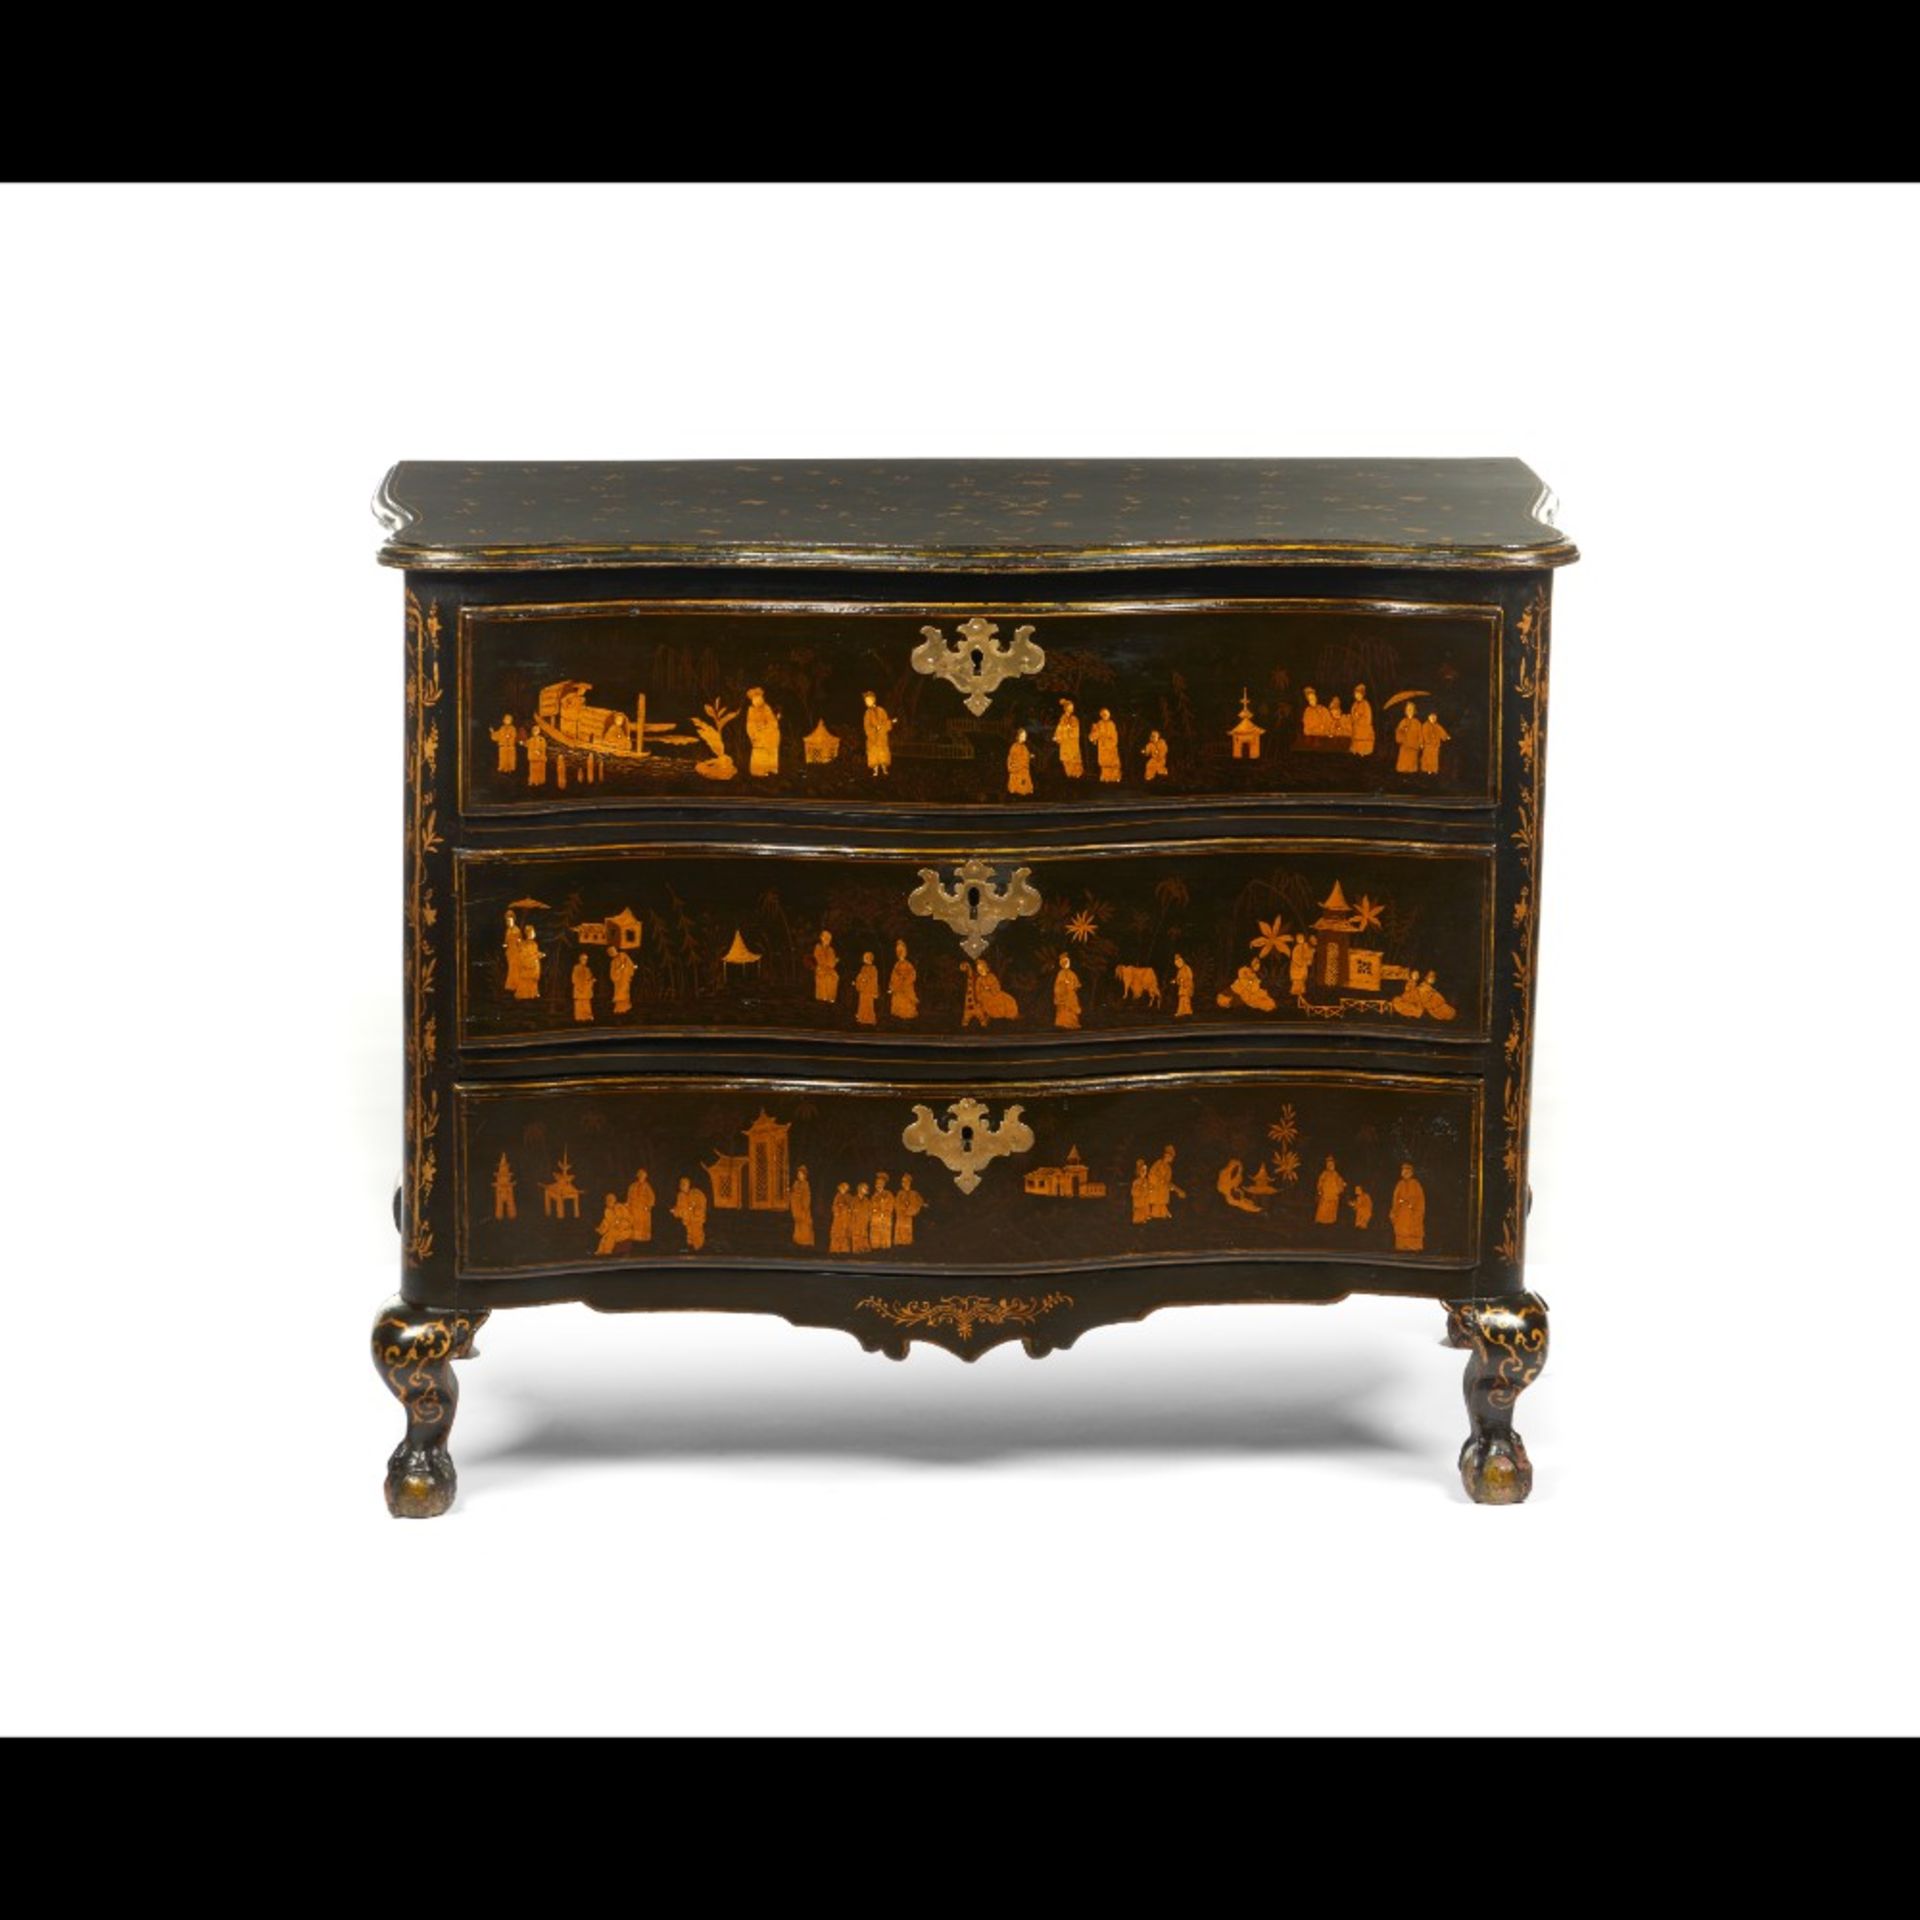  A Chippendale style chest of drawers - Image 2 of 2